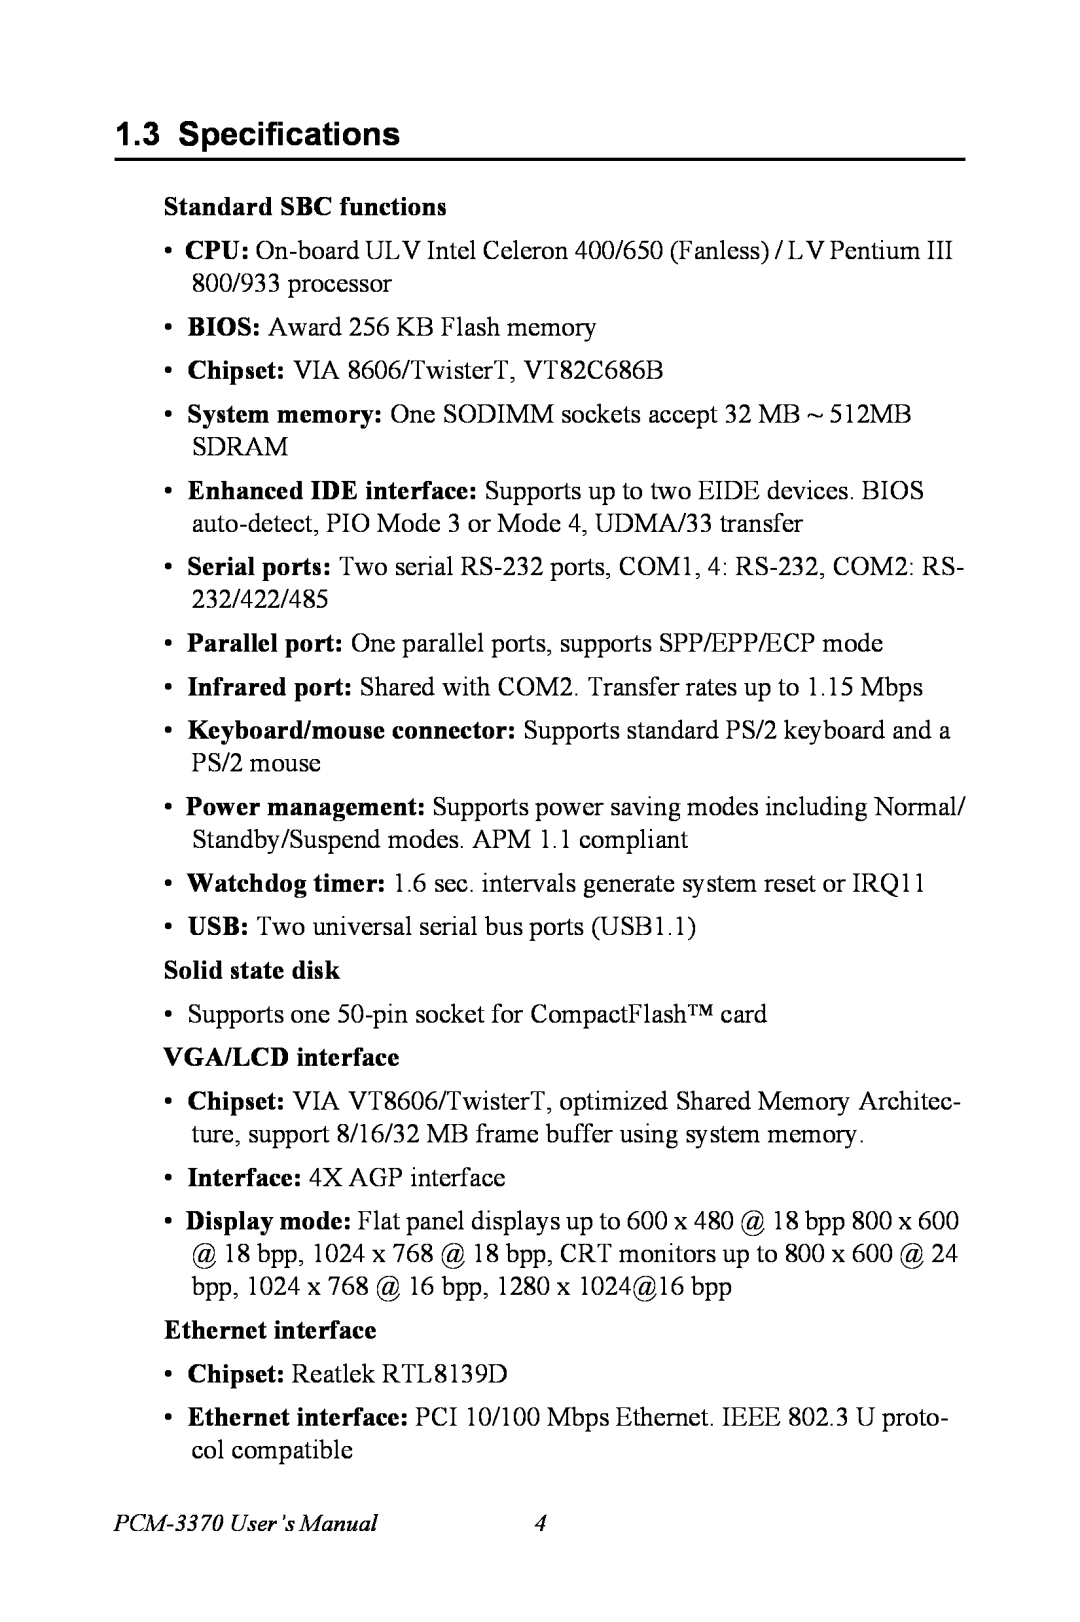 Intel PCM-3370 user manual Specifications, Standard SBC functions, Solid state disk, VGA/LCD interface, Ethernet interface 